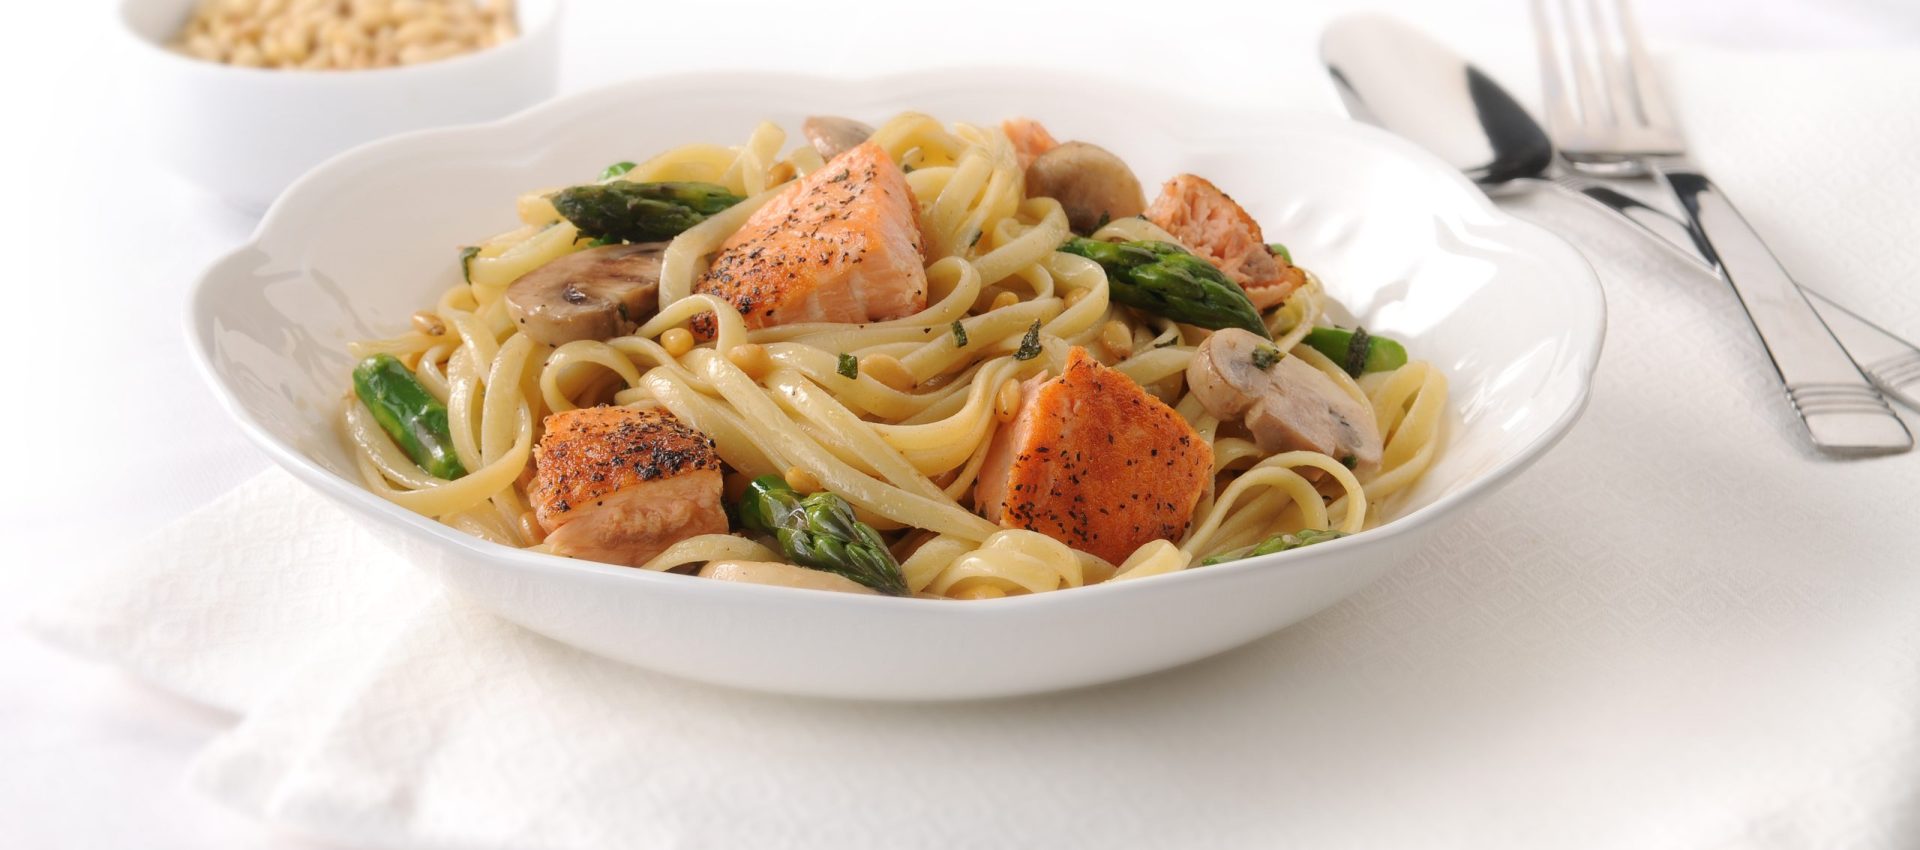 Linguine-with-Salmon-and-Asparagus-in-Brown-Butter-Sauce-scaled-1920x850 Linguine with Salmon and Asparagus in Brown Butter Sauce